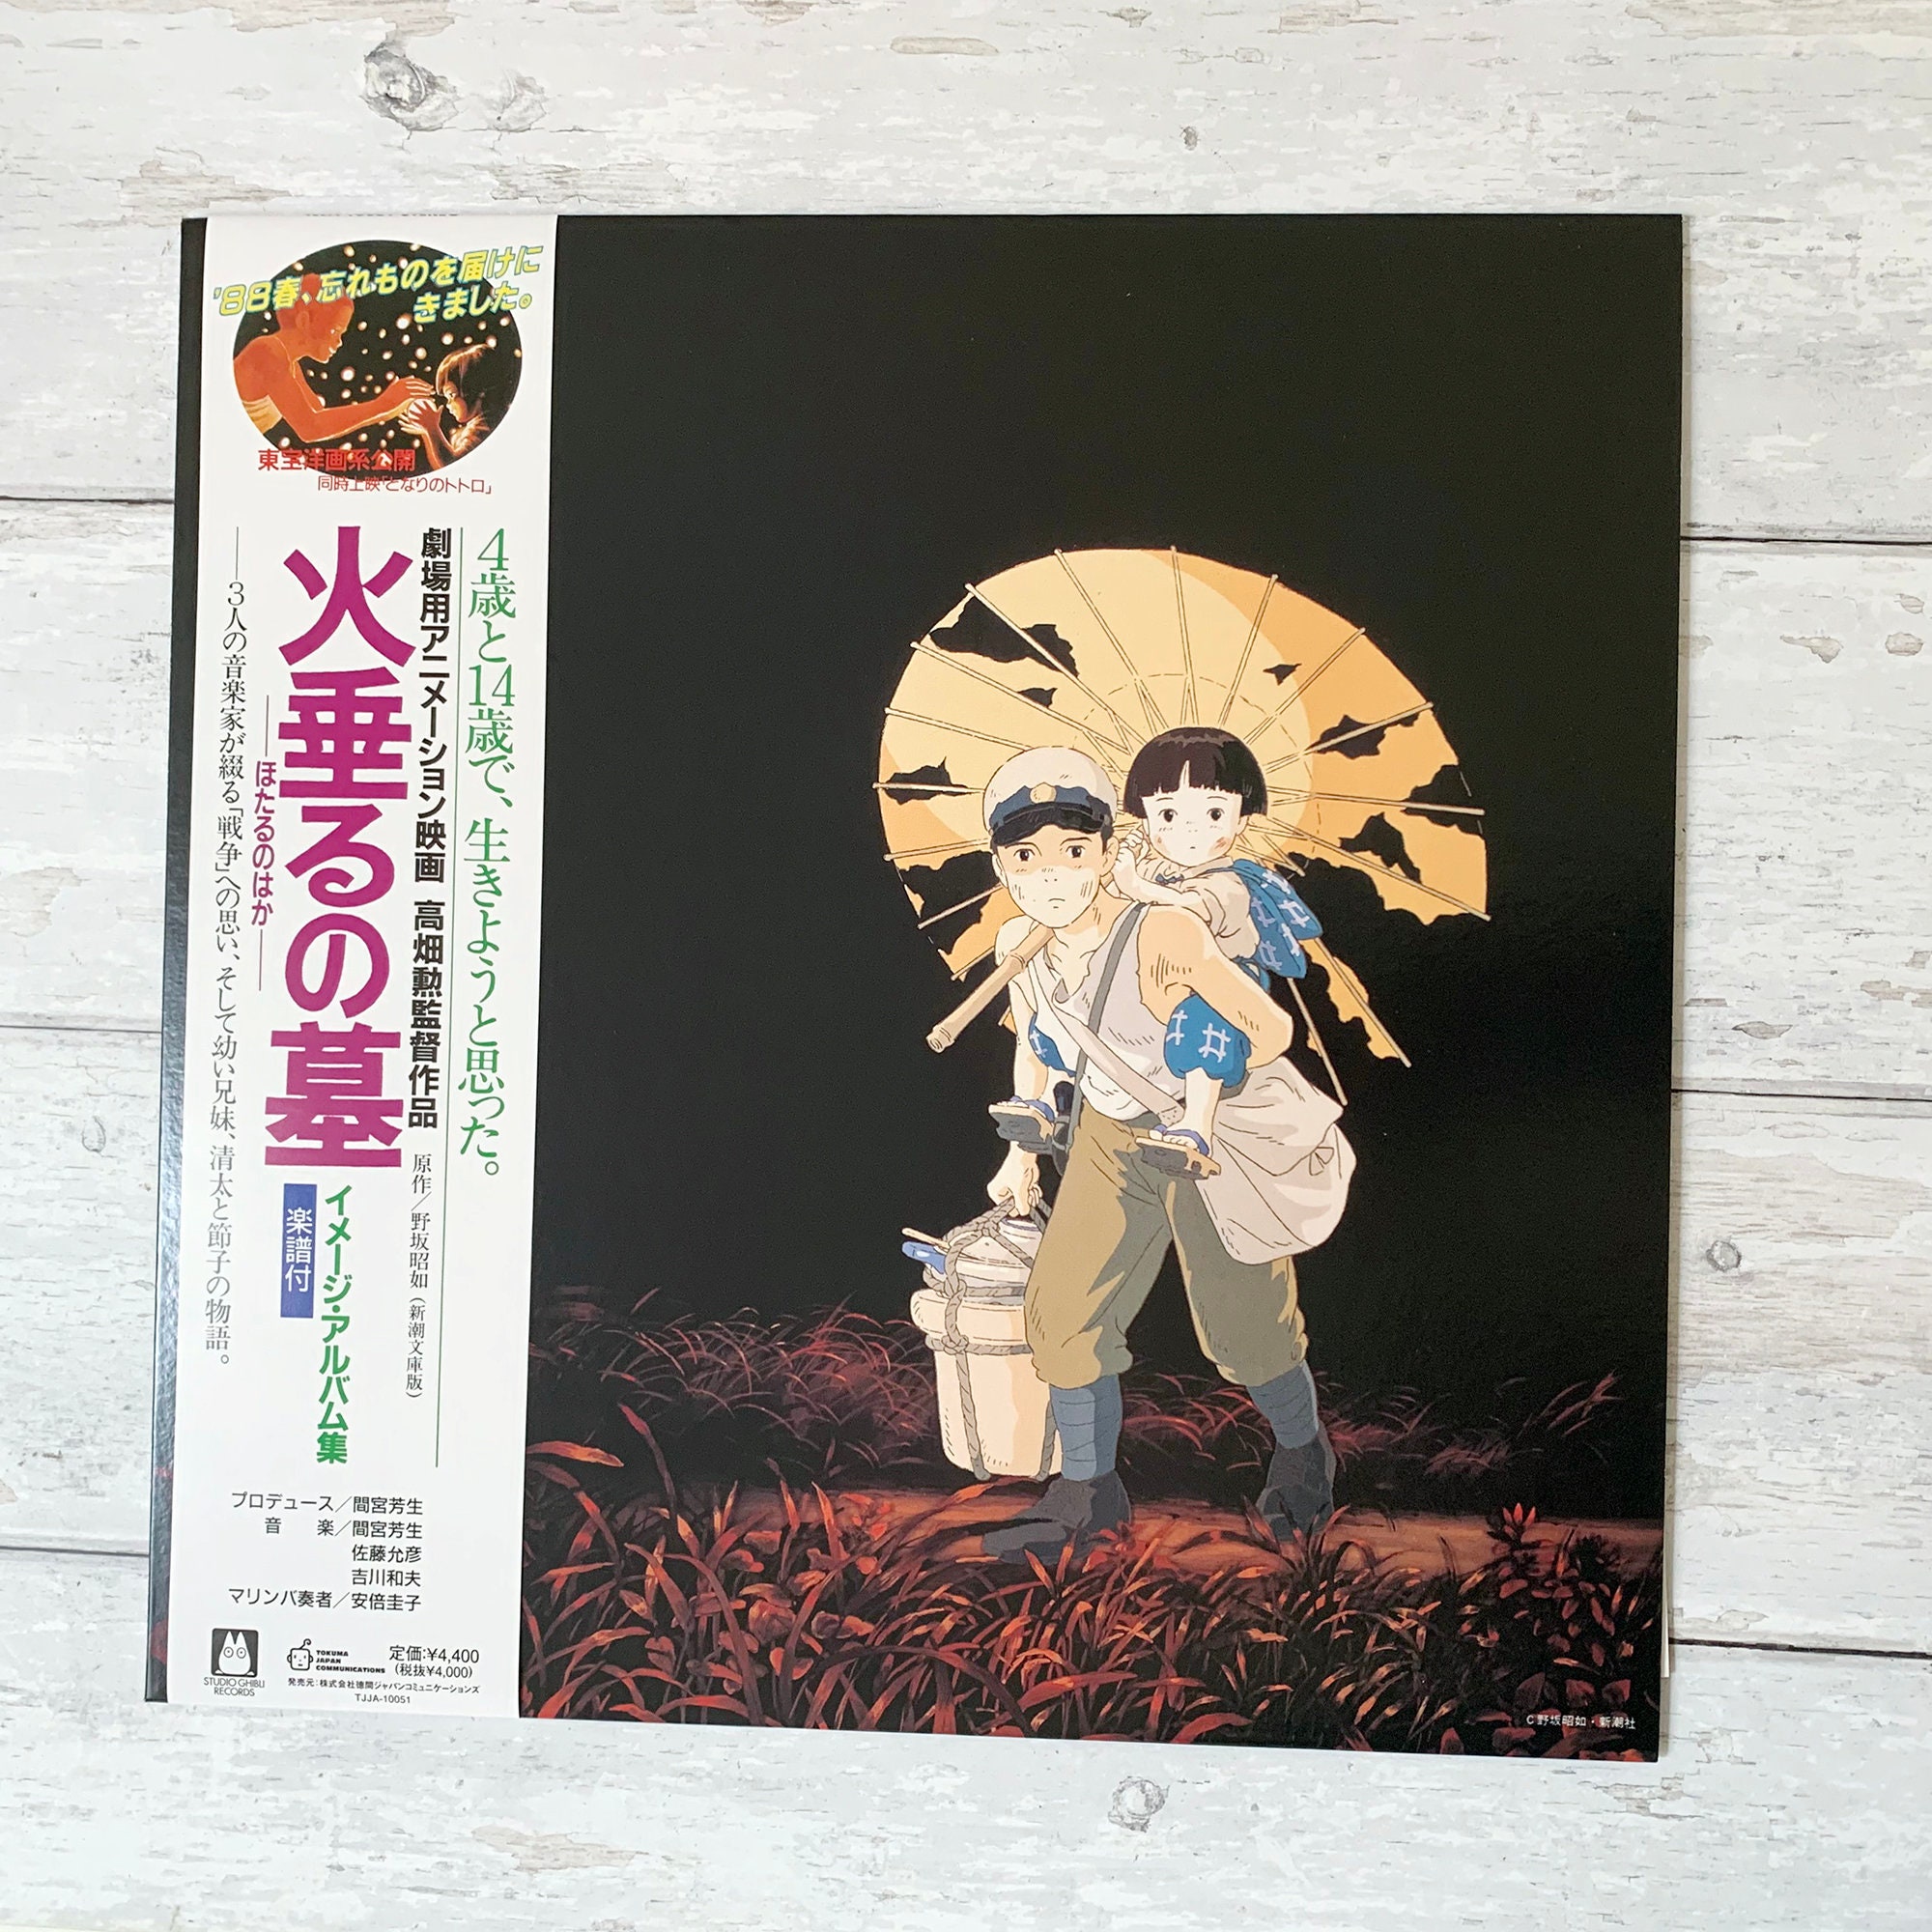 Grave Of The Fireflies - Studio Ghibli Japanaese Animated Movie Poster -  Posters by Studio Ghibli, Buy Posters, Frames, Canvas & Digital Art Prints